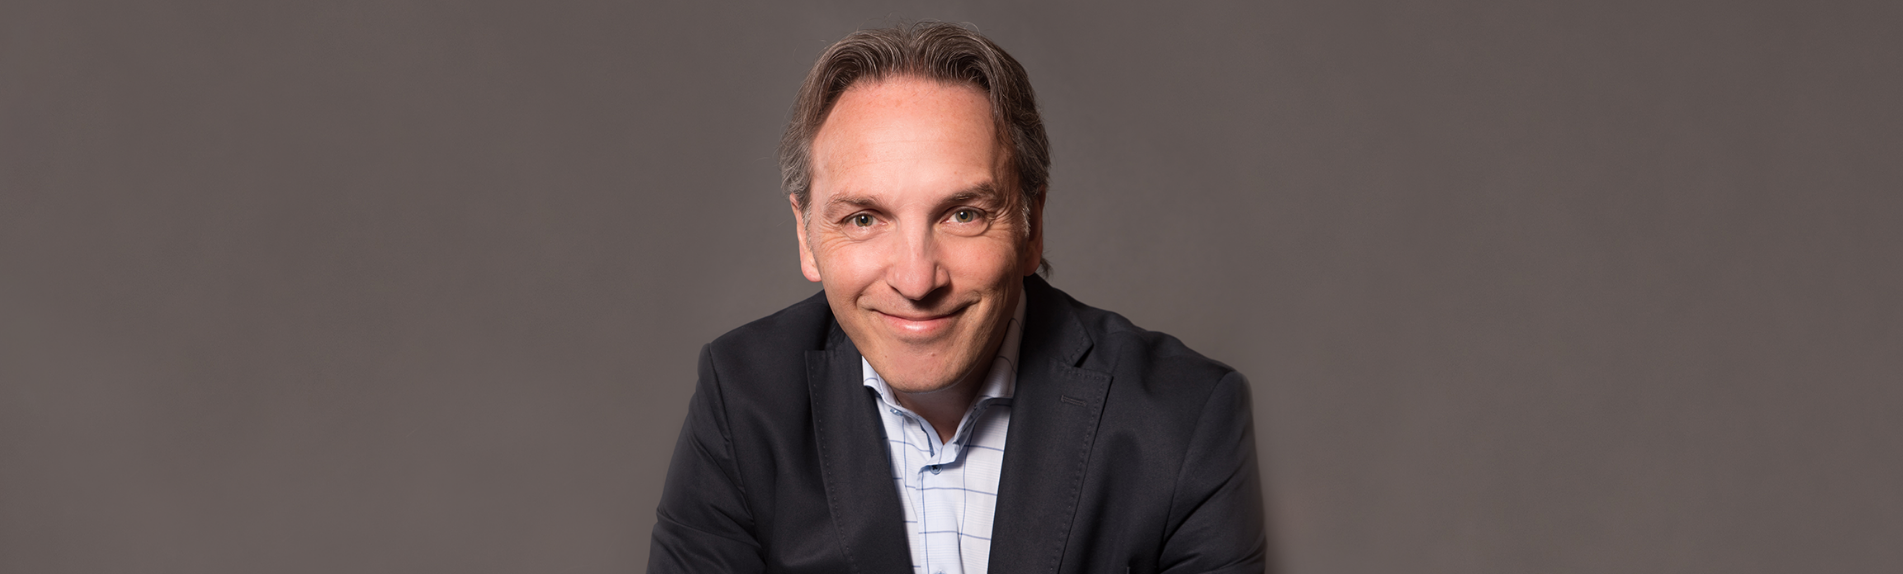 iWeb Canada becomes Leaseweb with new CEO Roger Brulotte